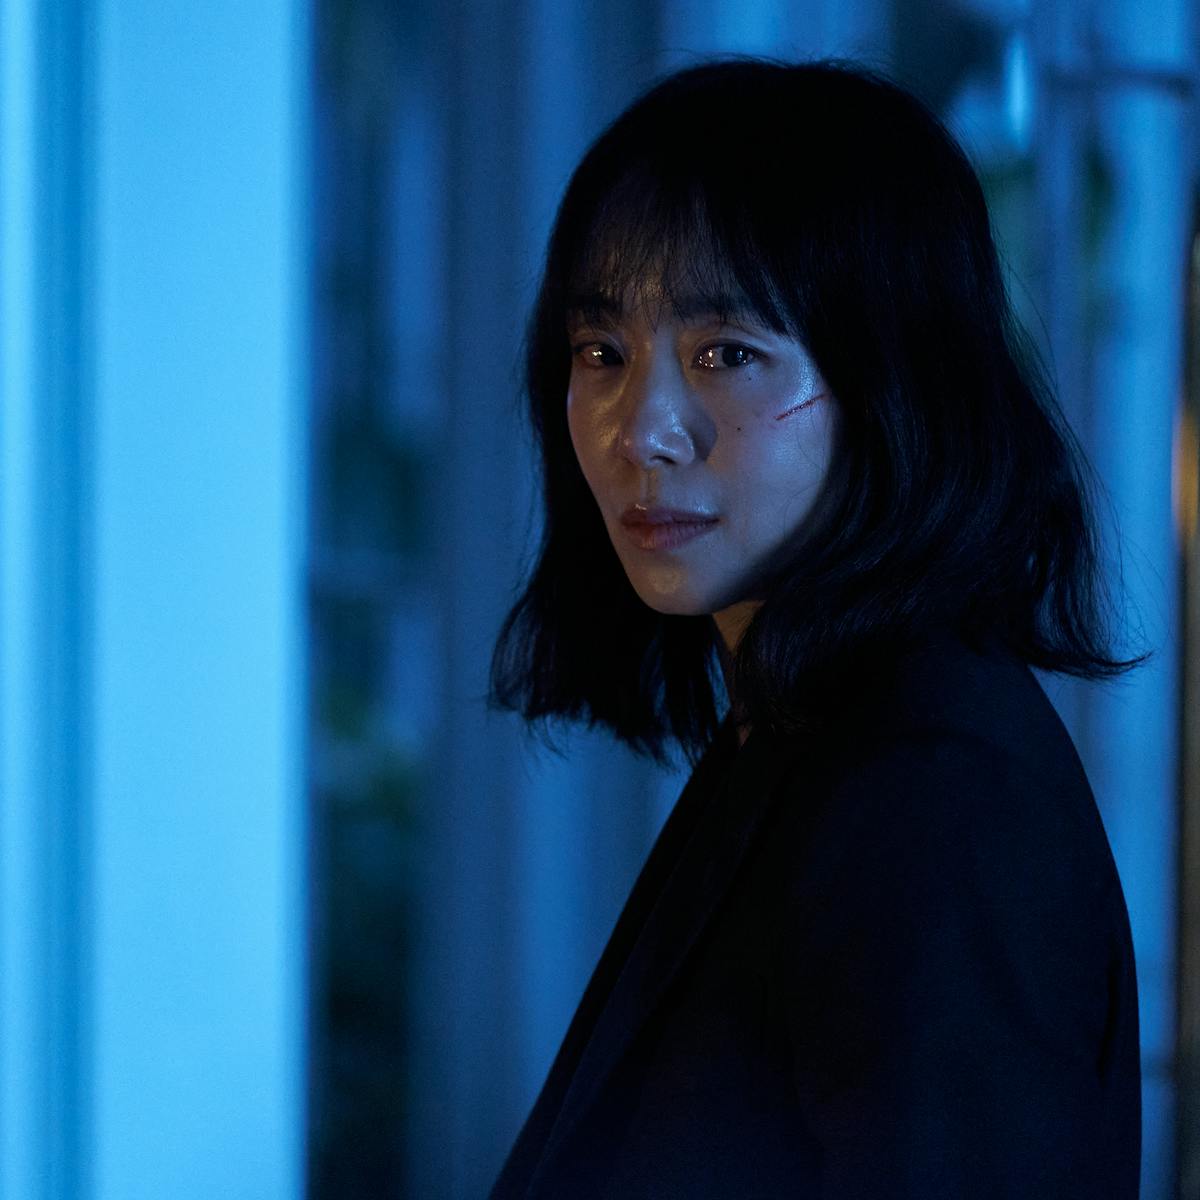 Jeon Do-yeon wears a black top and looks at the camera. On her cheek is a thin red cut. 